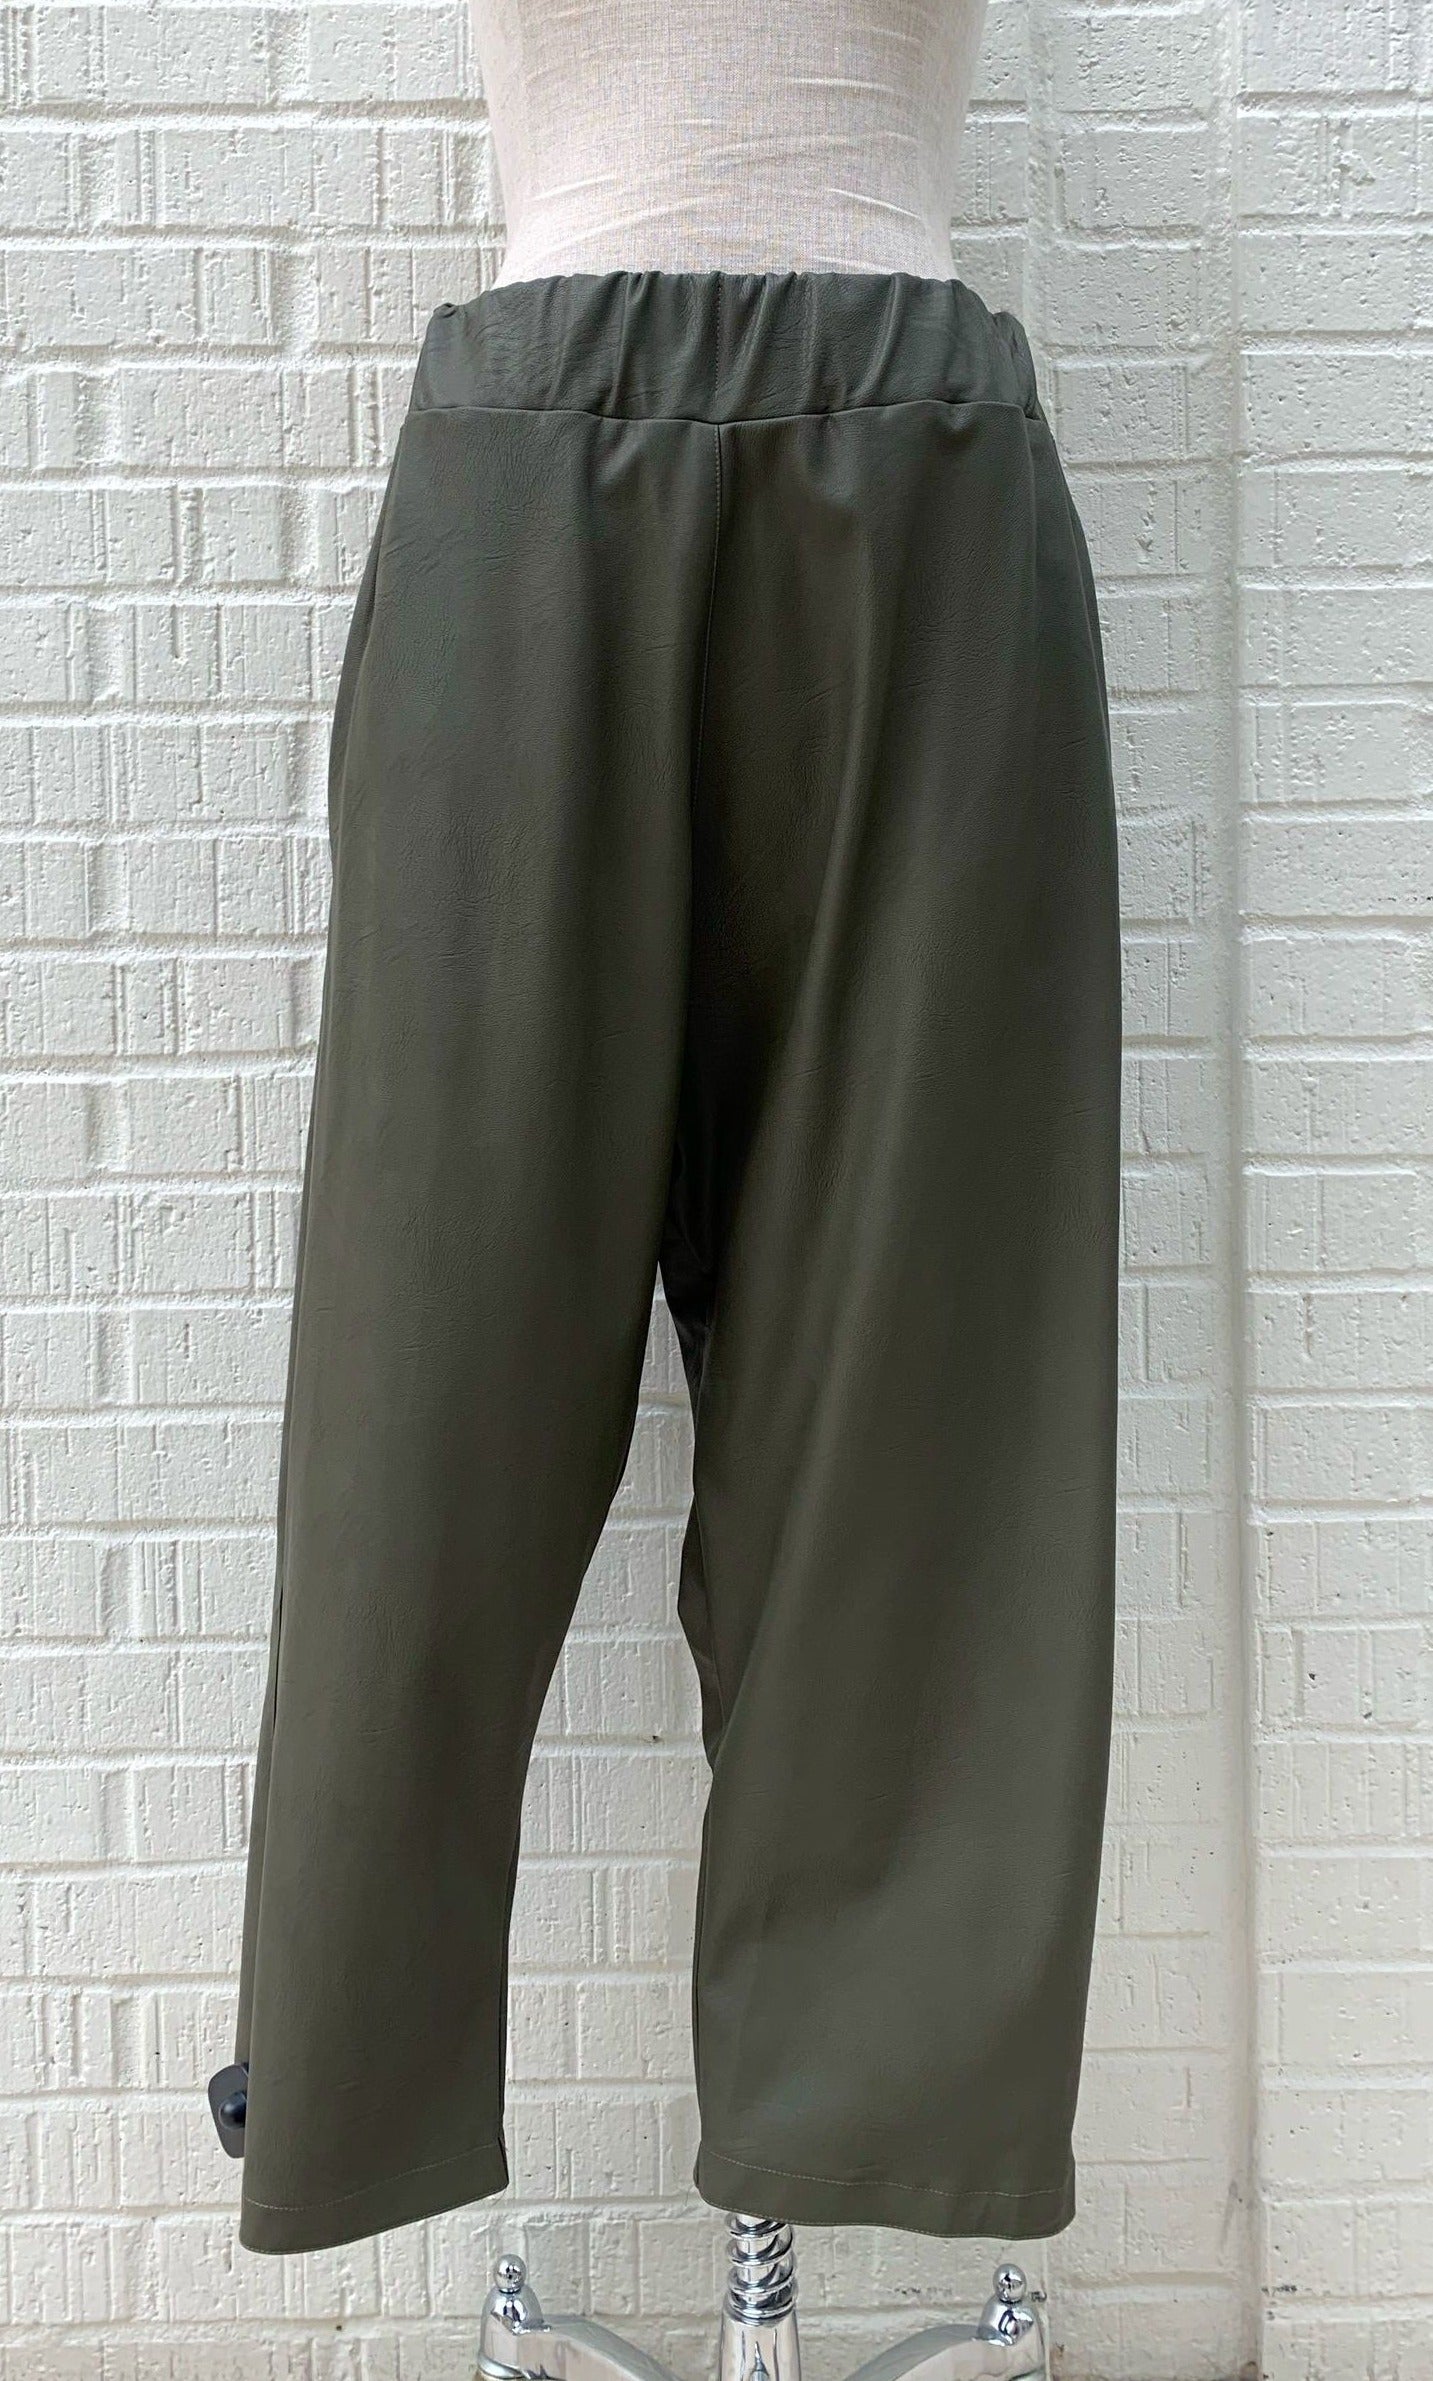 Front bottom half view of the hashtagmart green crop pant. This pant has an elastic waistband, a wide leg, and a drop crotch. The looks like leather.